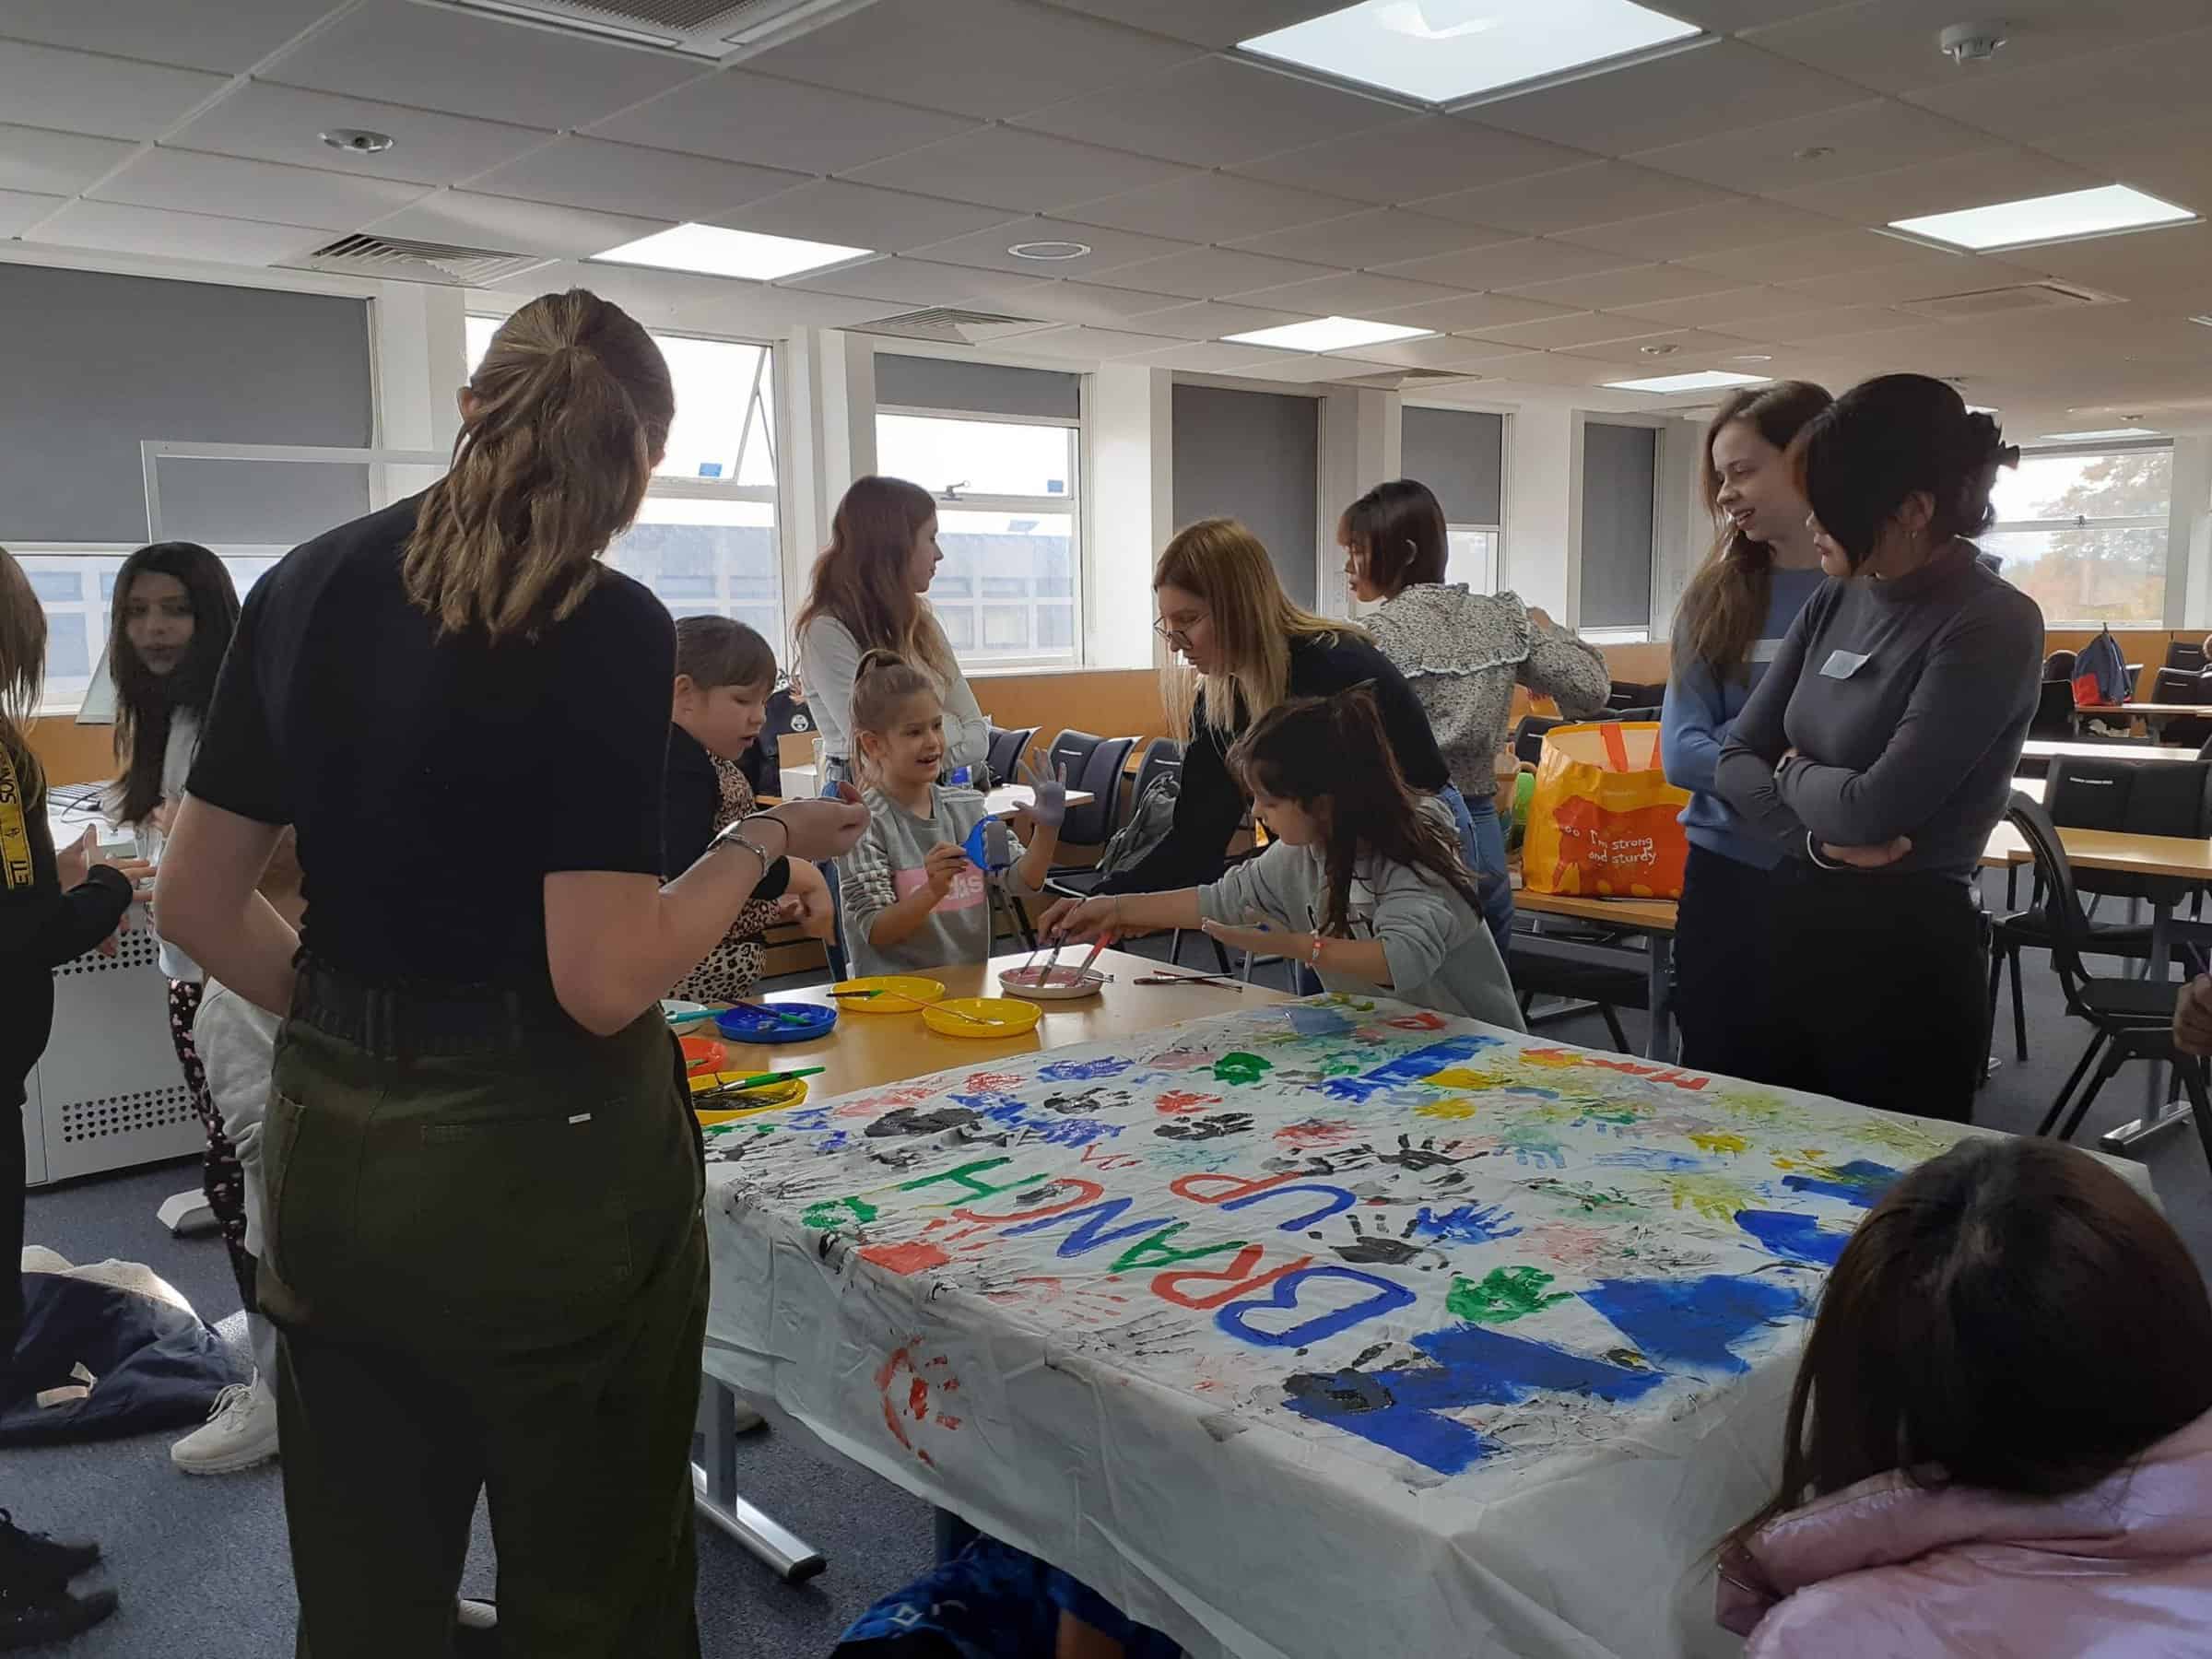 14 students and young people are mingling in a room around a table. On the table a big white cloth reads BRANCH UP in multicoloured paint with painted handprints around it.